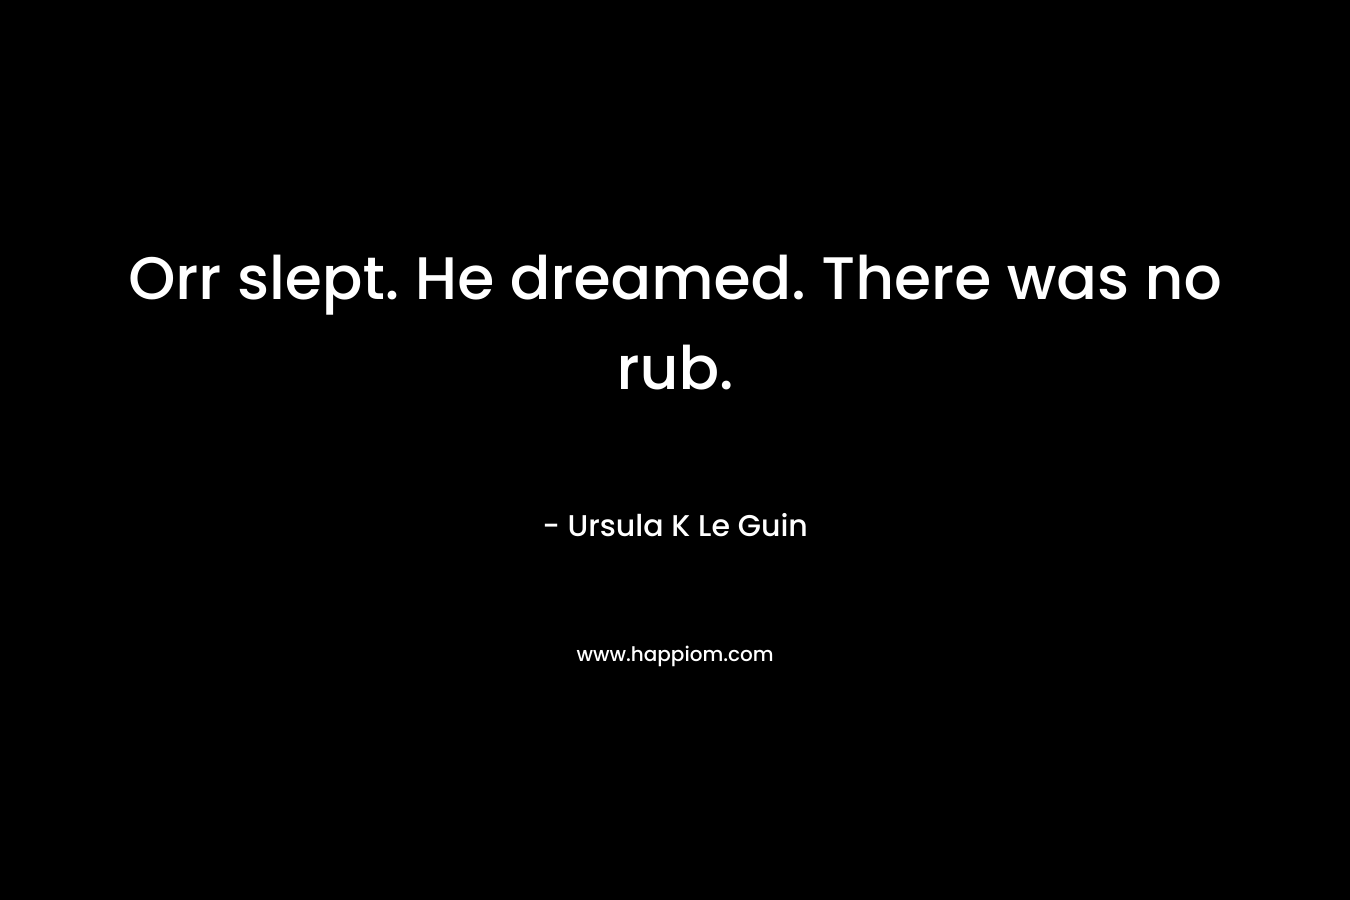 Orr slept. He dreamed. There was no rub. – Ursula K Le Guin